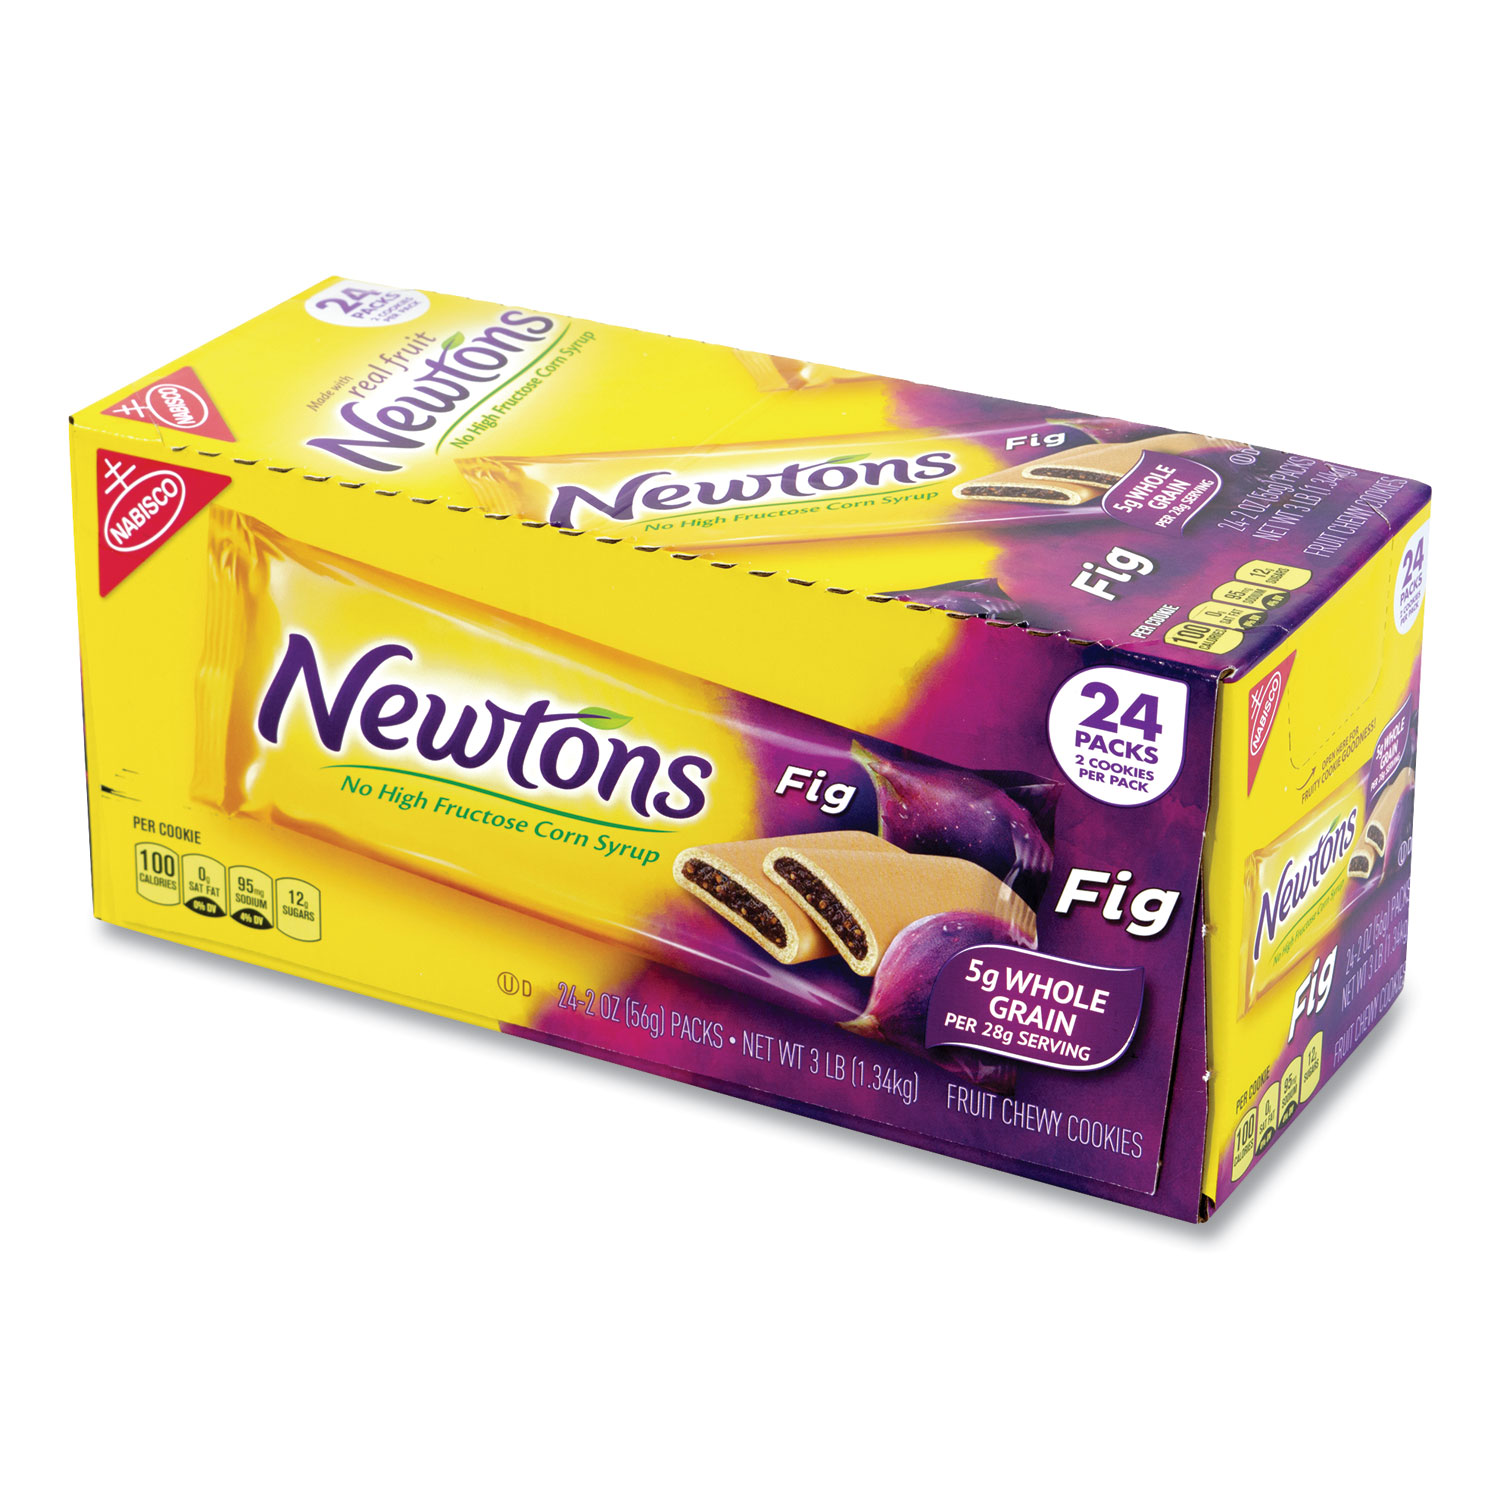  Nabisco 34974 Fig Newtons, 2 oz Pack, 2 Cookies/Pack 24 Packs/Box, Free Delivery in 1-4 Business Days (GRR22000462) 